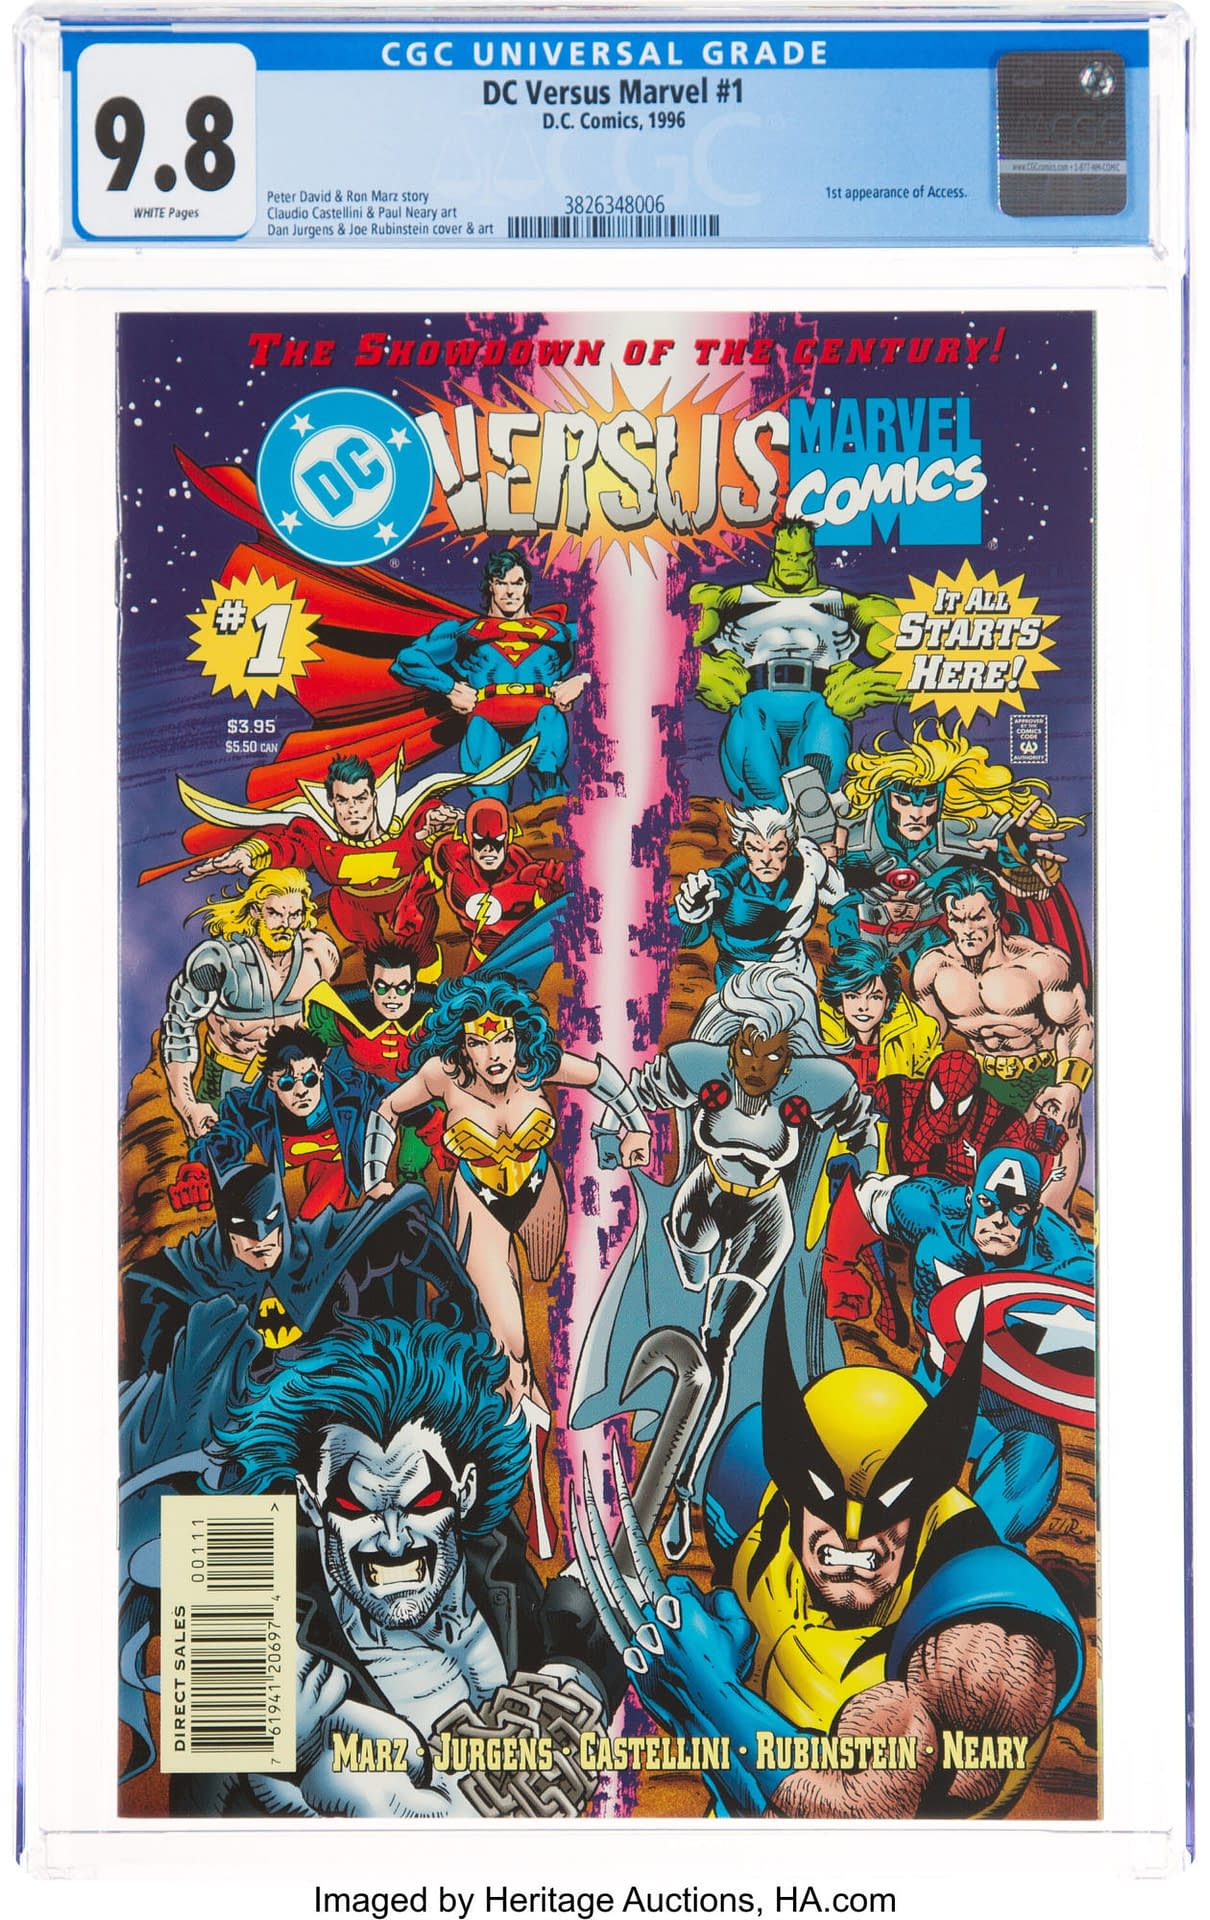 DC Vs Marvel #1 CGC  Taking Bids At Heritage Auctions